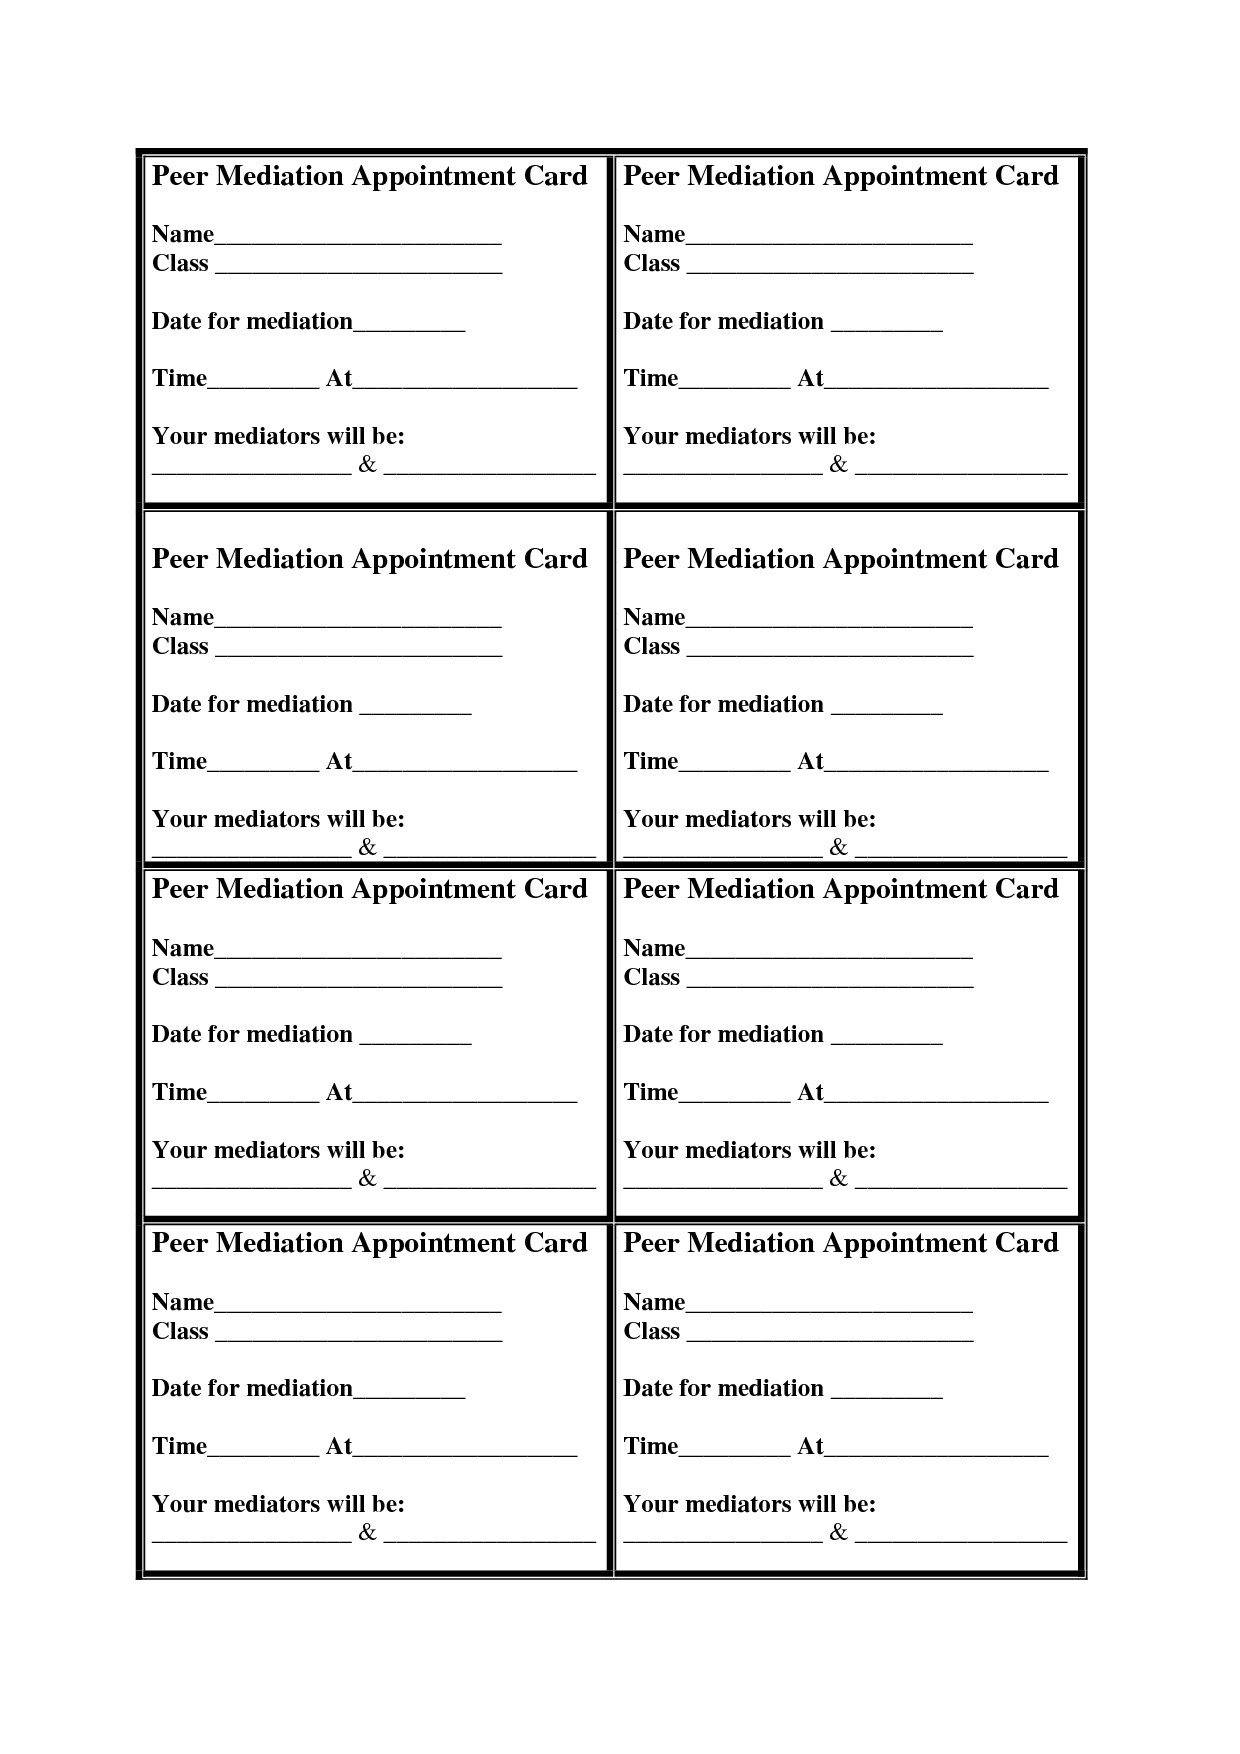 Medical Appointment Card Template Free ] - Appointment Card Within Medical Appointment Card Template Free